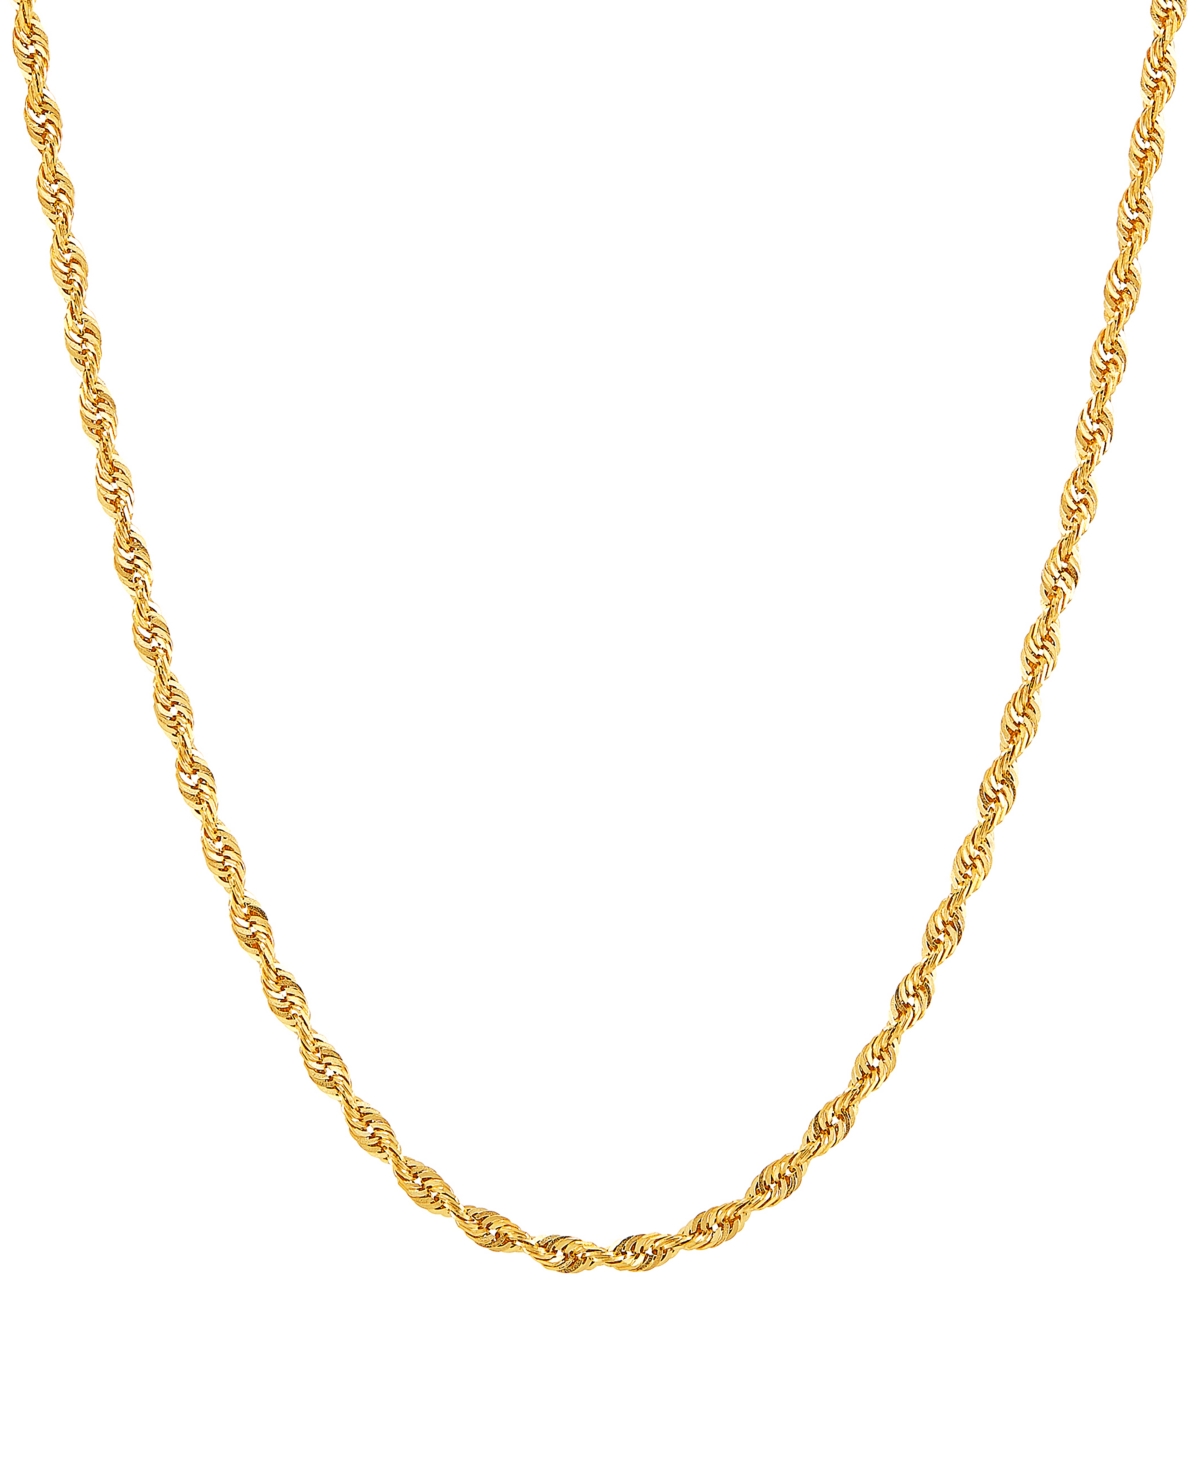 Macy's Glitter Rope Link 18" Chain Link Necklace In 14k Gold